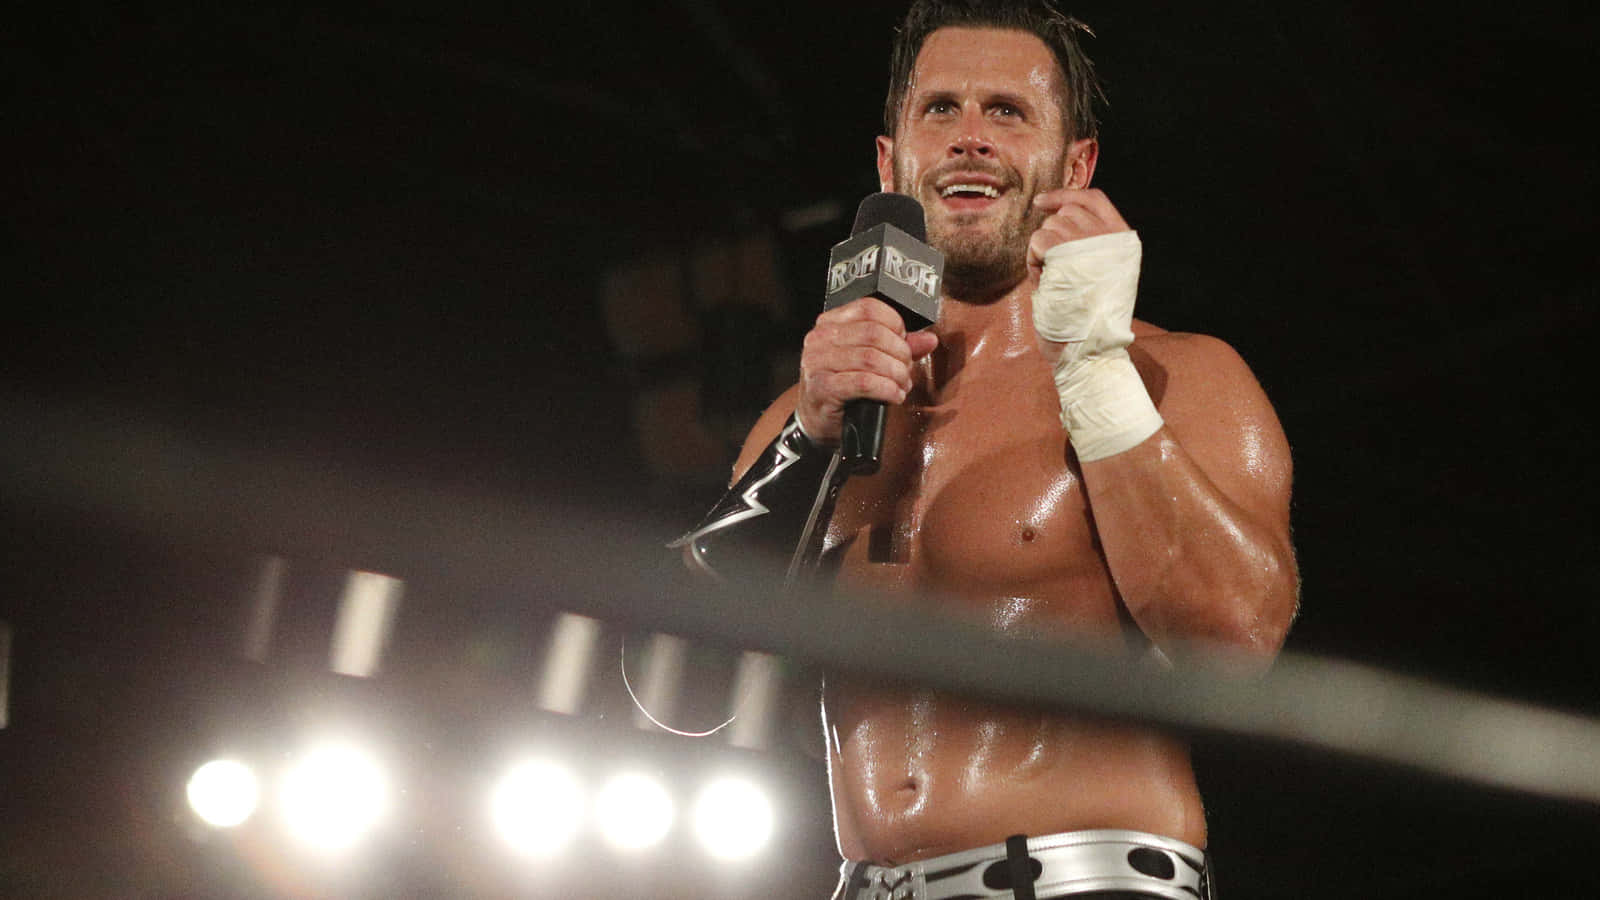 Alex Shelley Smiling During Speech On Impact Wrestling Wallpaper